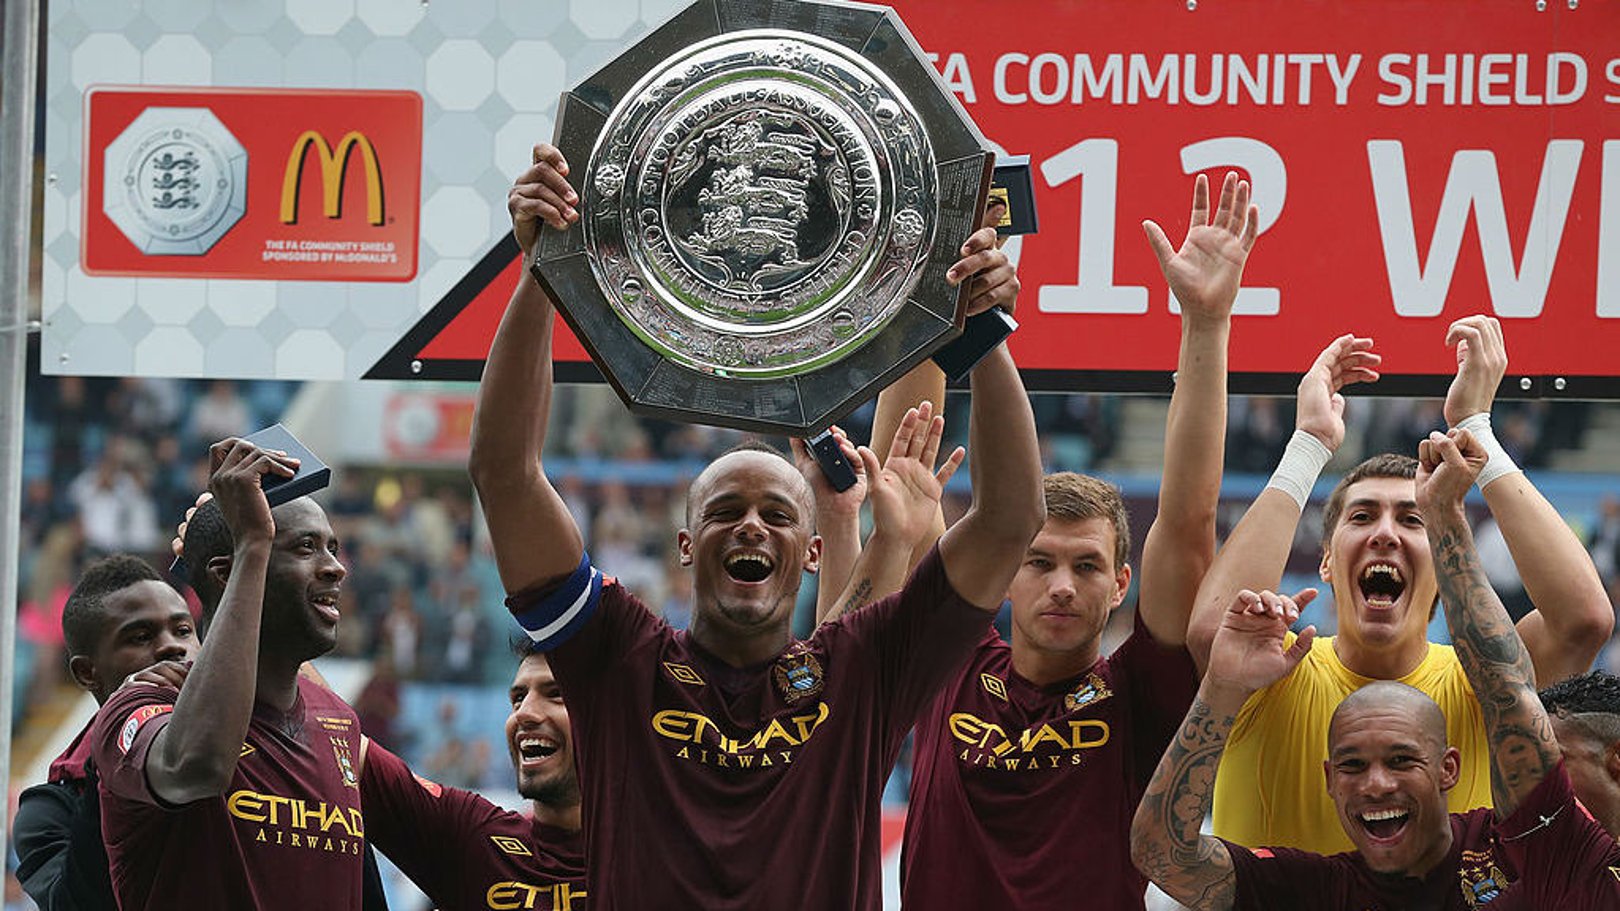 ALL SMILES: Vincent Kompany lifts the Community Shield as City celebrate after our 3-2 victory over Chelsea in 2012